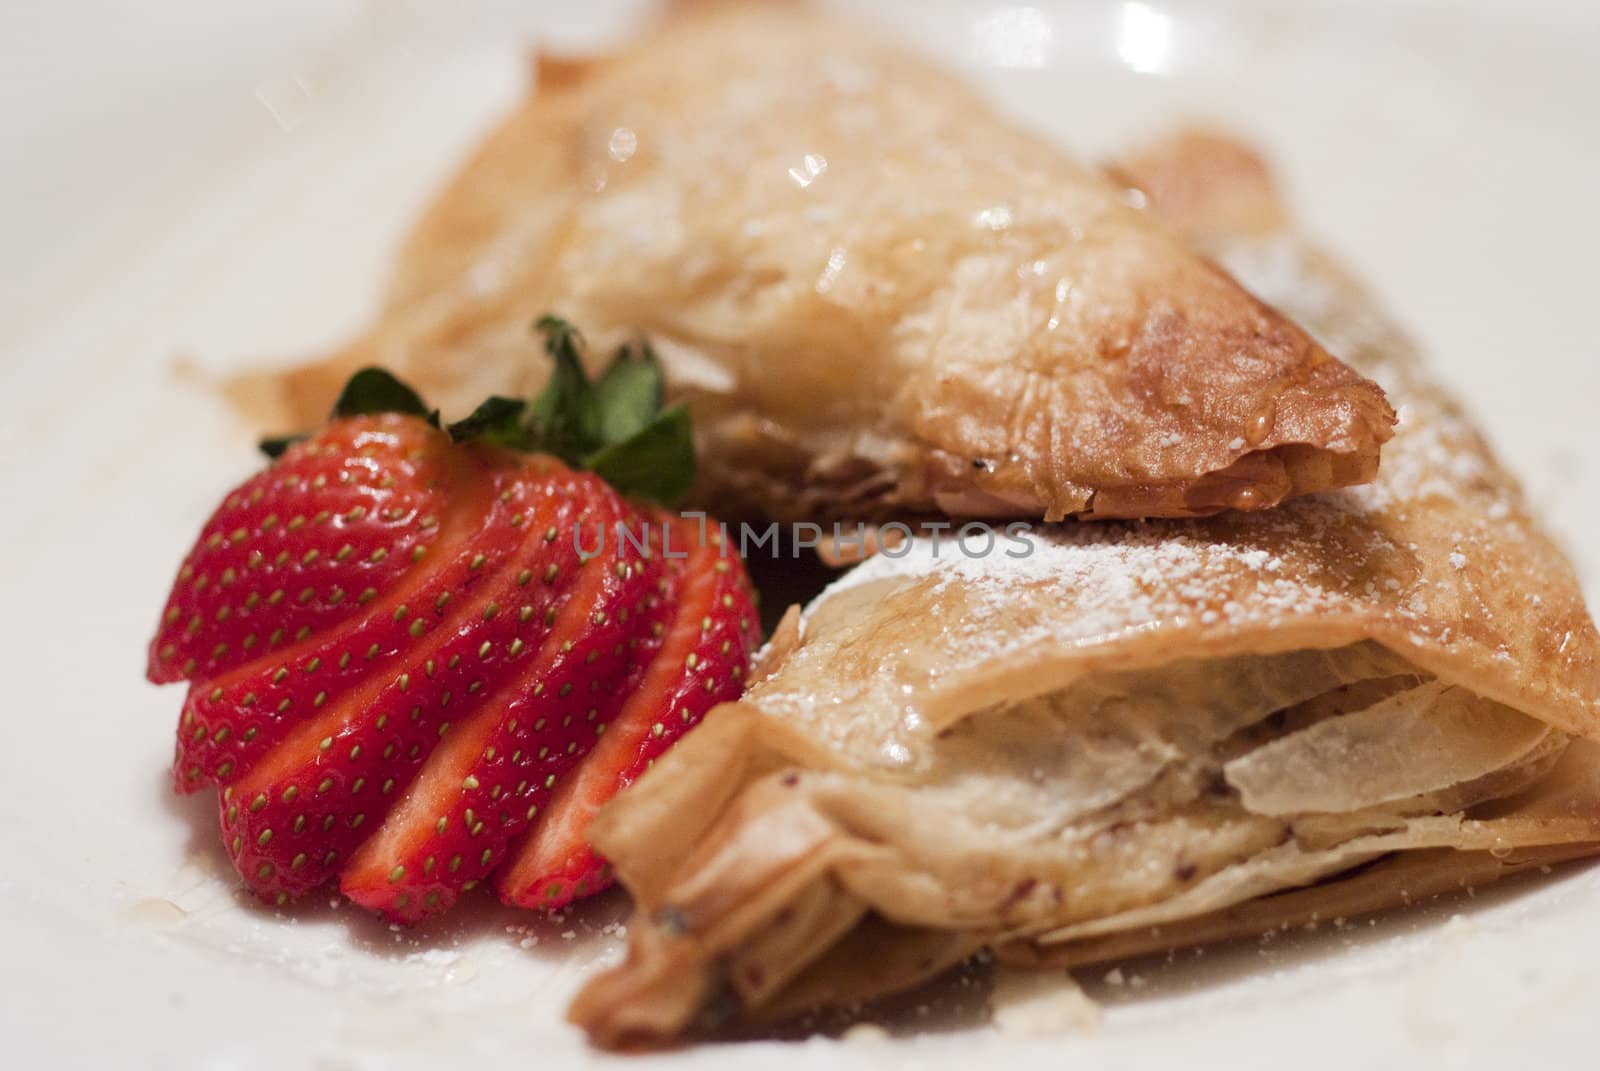 Filled Apple Pastries with Strawberries and Sugar